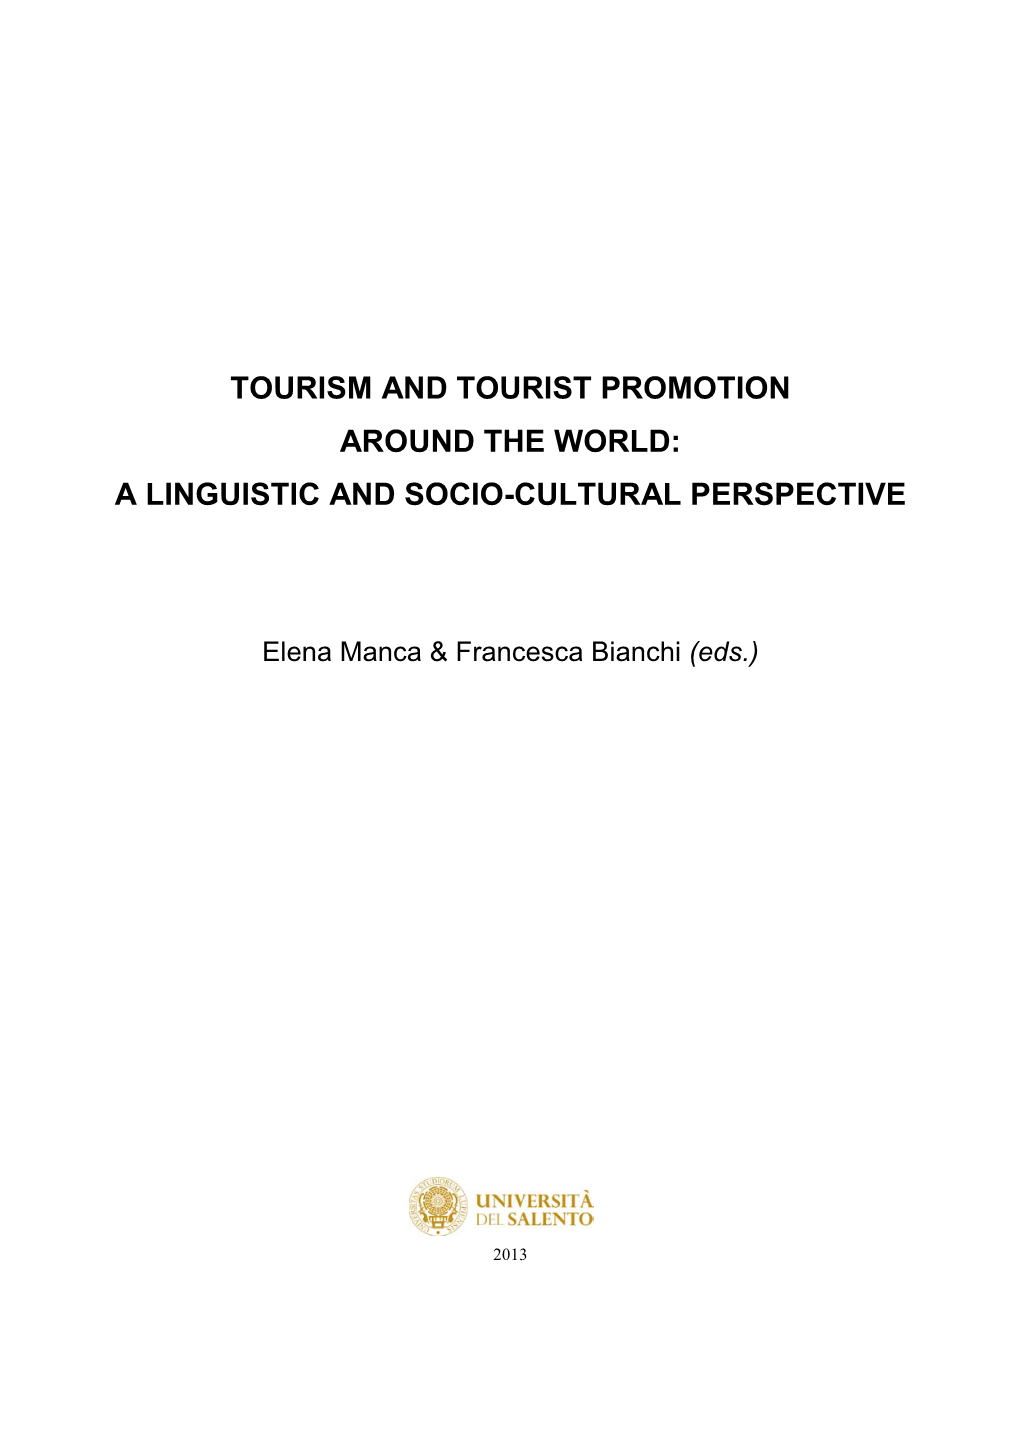 Tourism and Tourist Promotion Around the World: a Linguistic and Socio-Cultural Perspective